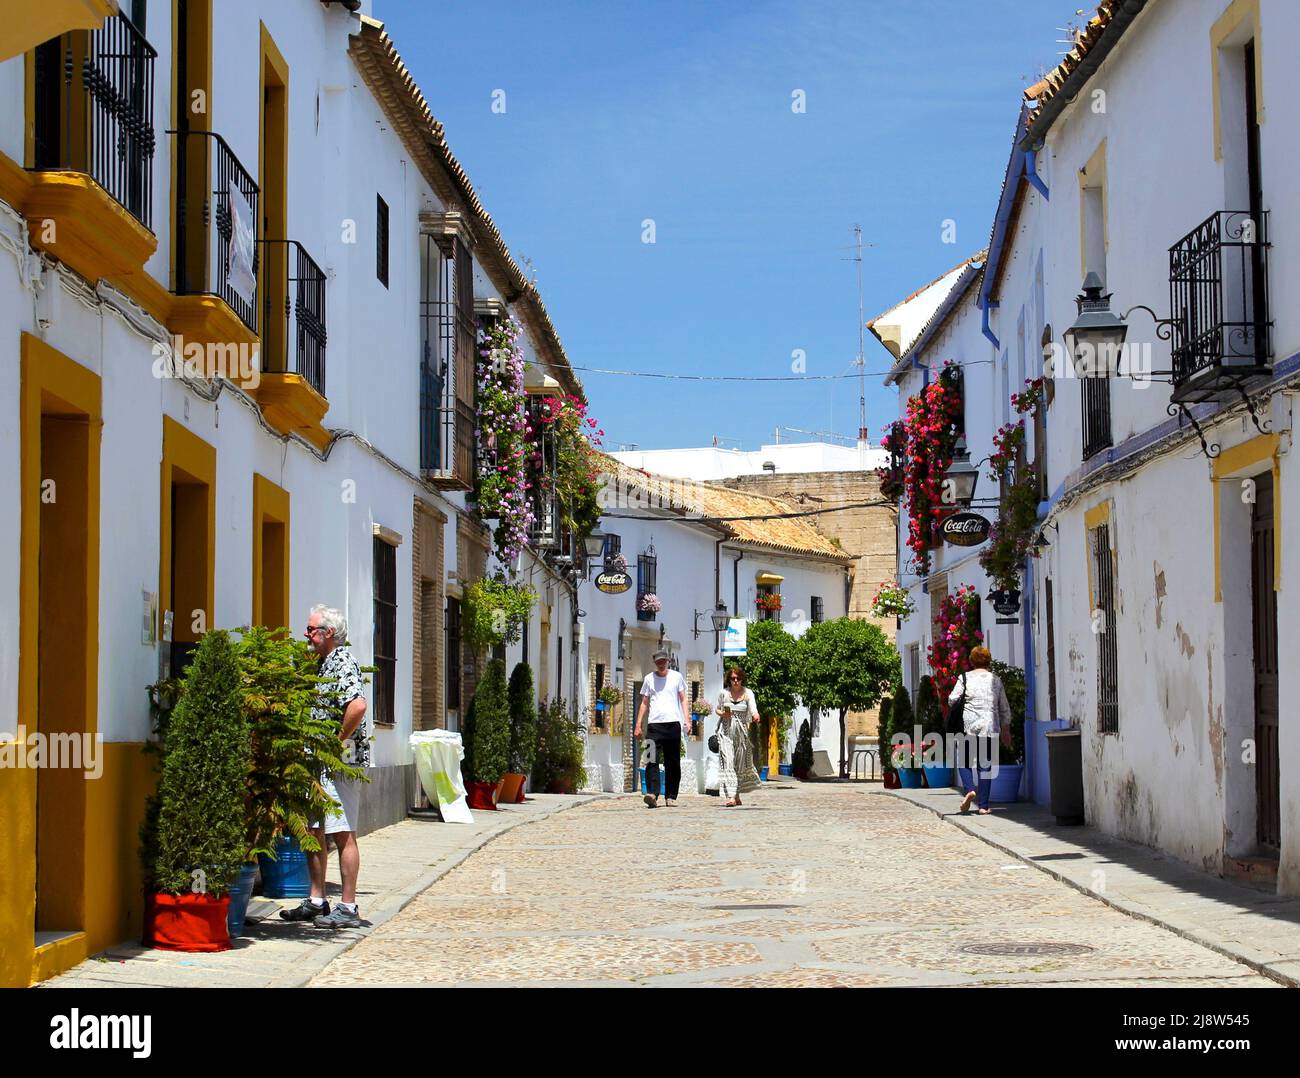 Stone-paved streets of old Cordoba during the Patio festival, with potted plants and flowers adorning houses. Stock Photo